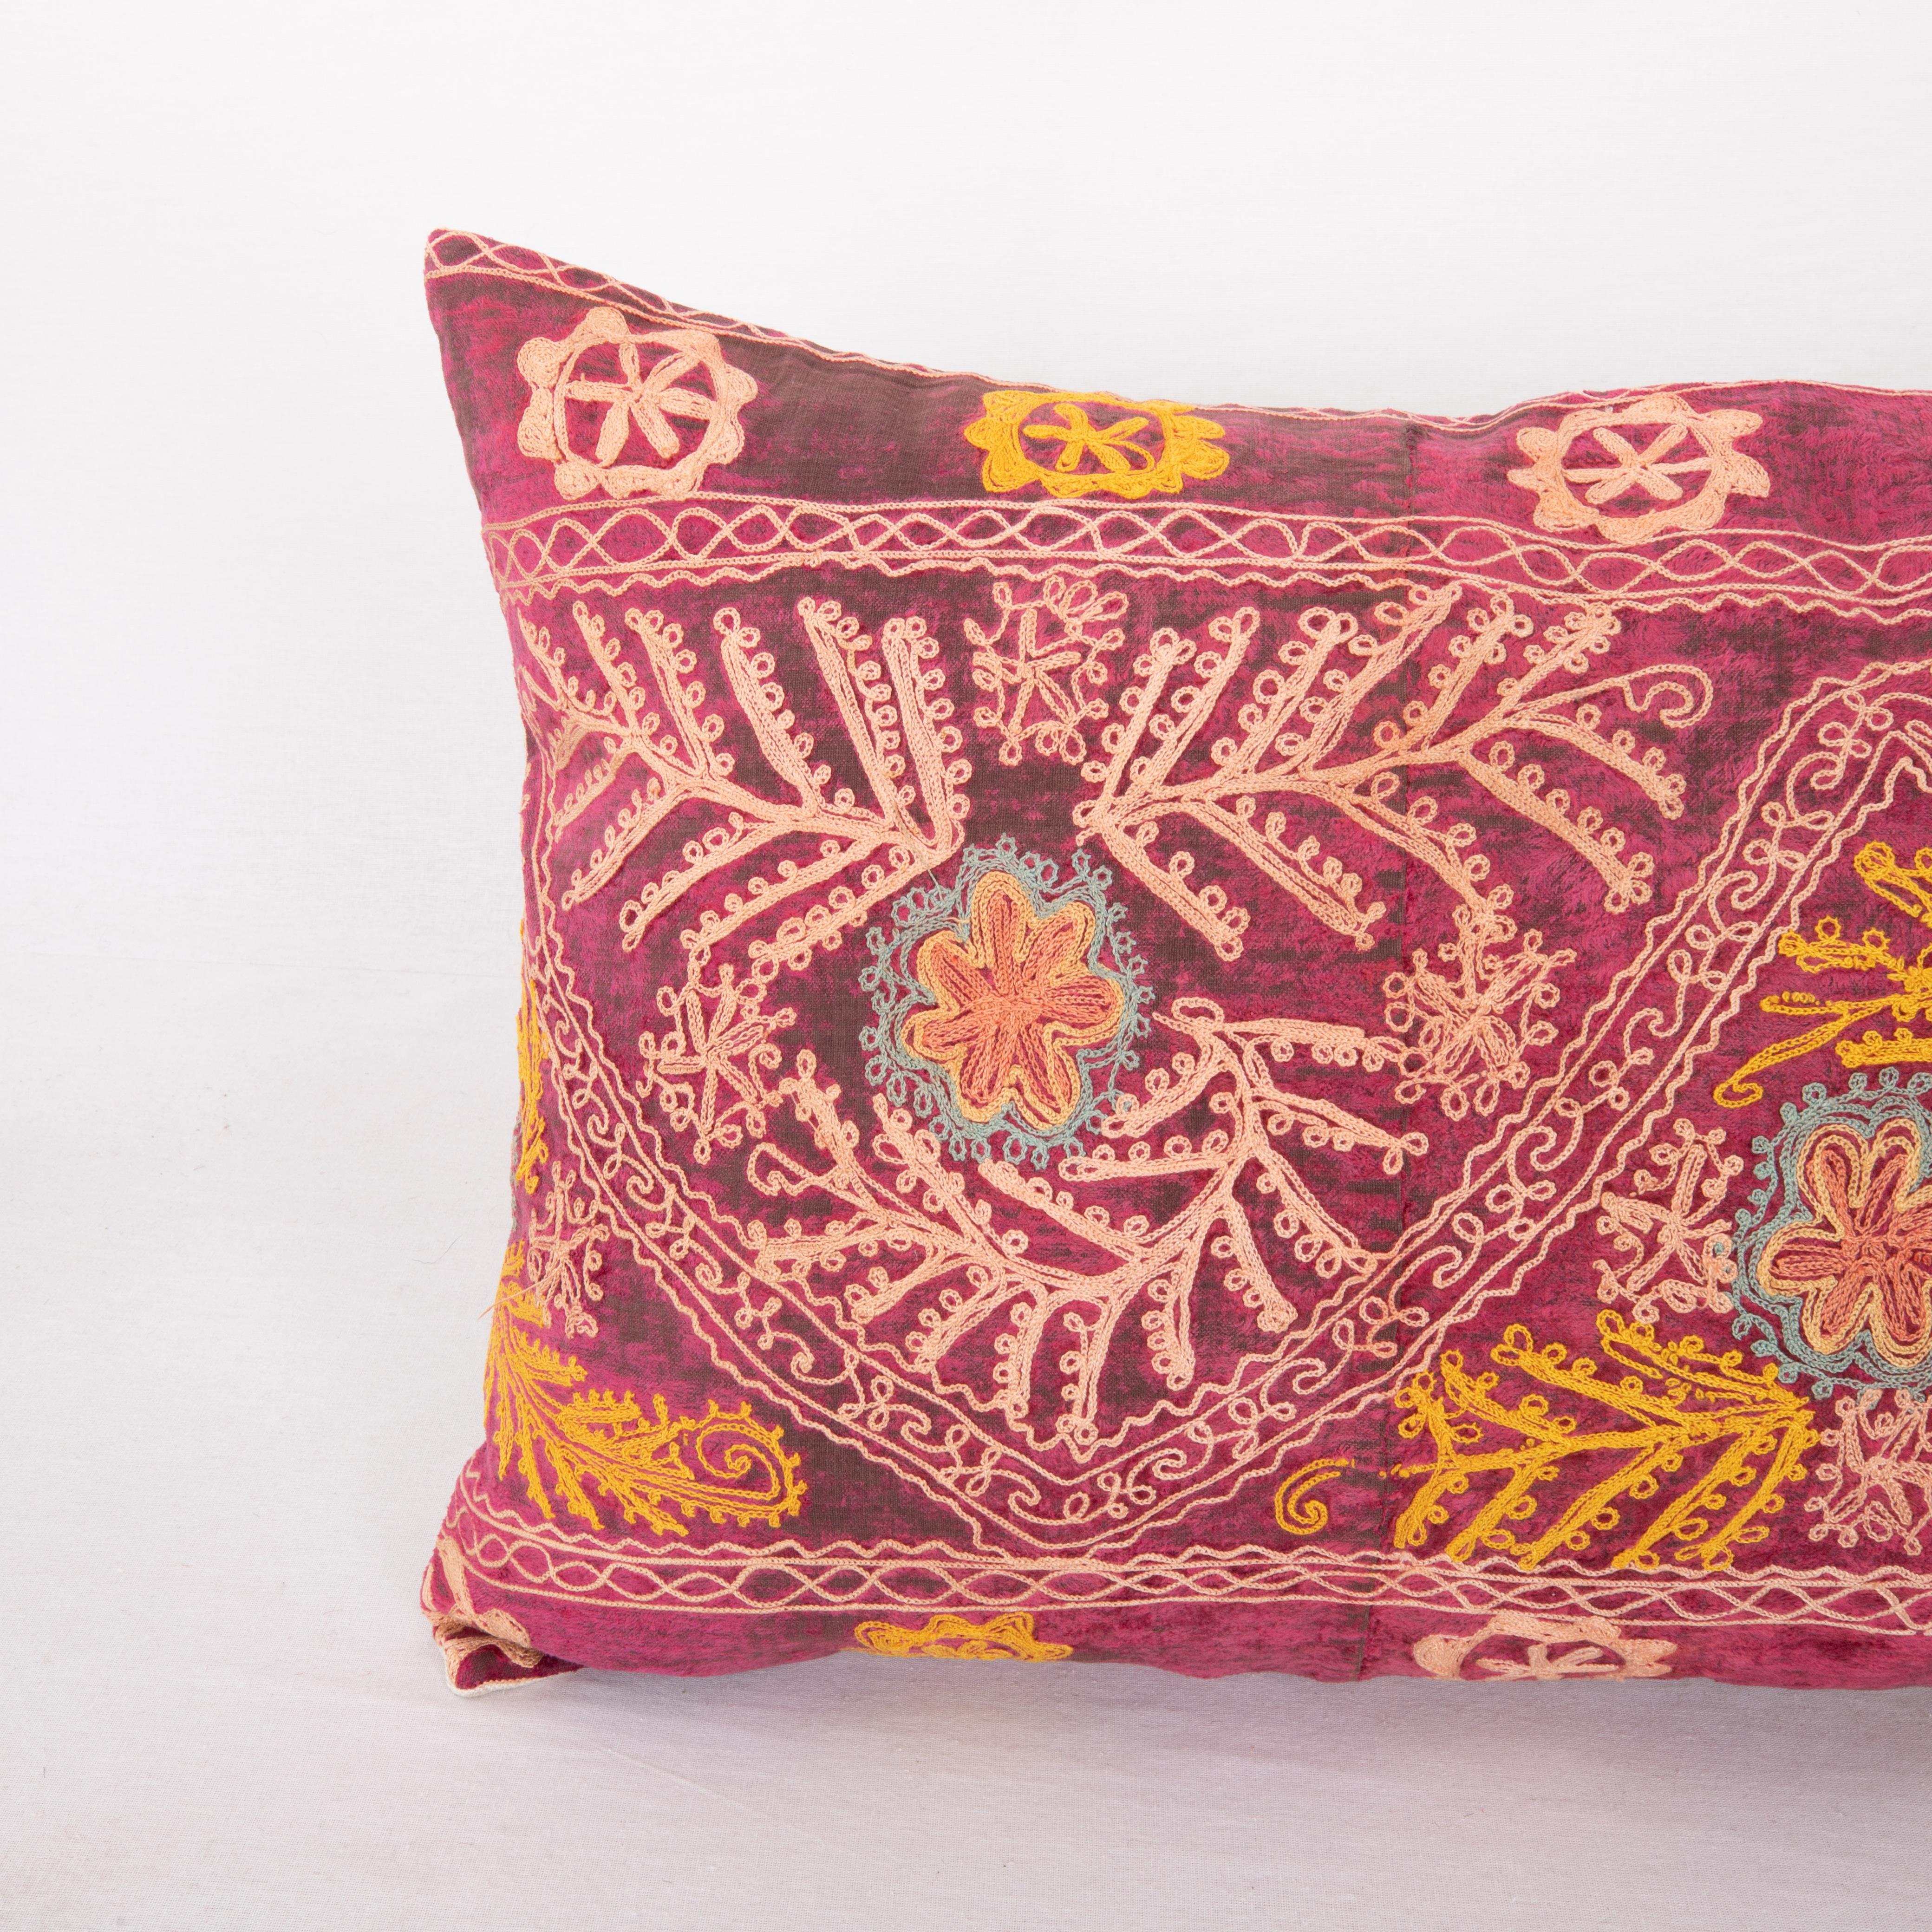 Uzbek Suzani Pillow Case Made from a Vintage Velvet Ground Suzani, Mid-20th Century For Sale